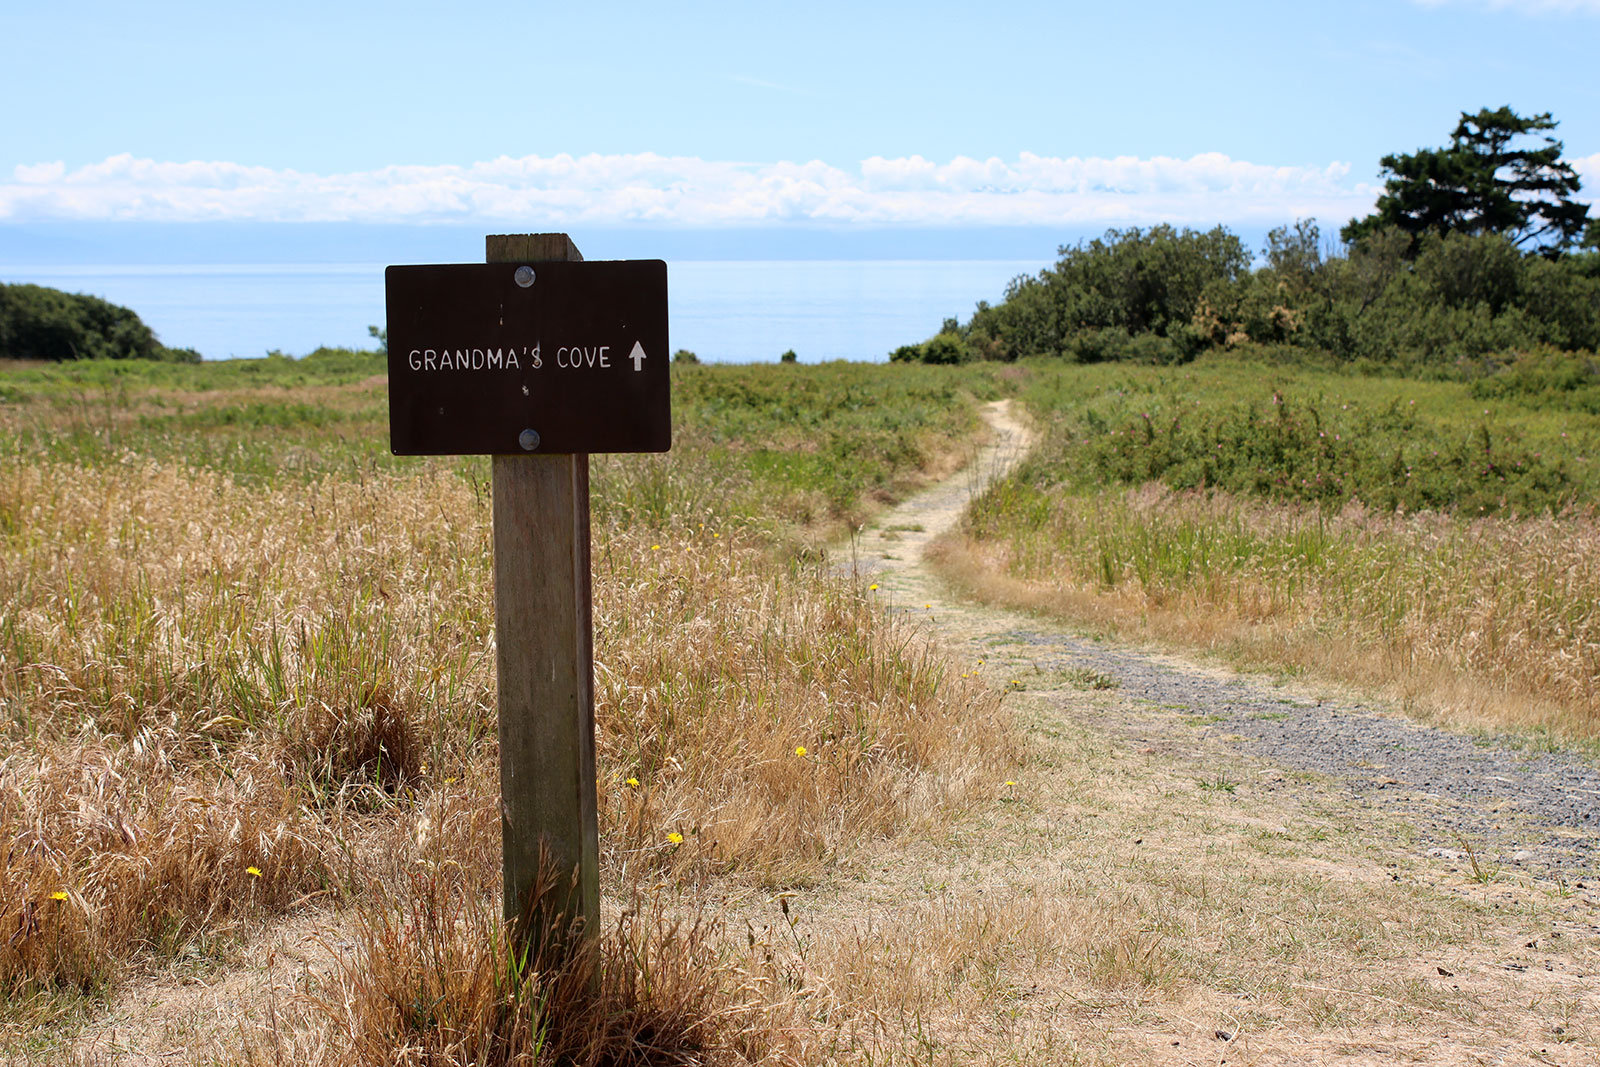 Sign for Granny’s Cove along a narrow walking path through grass